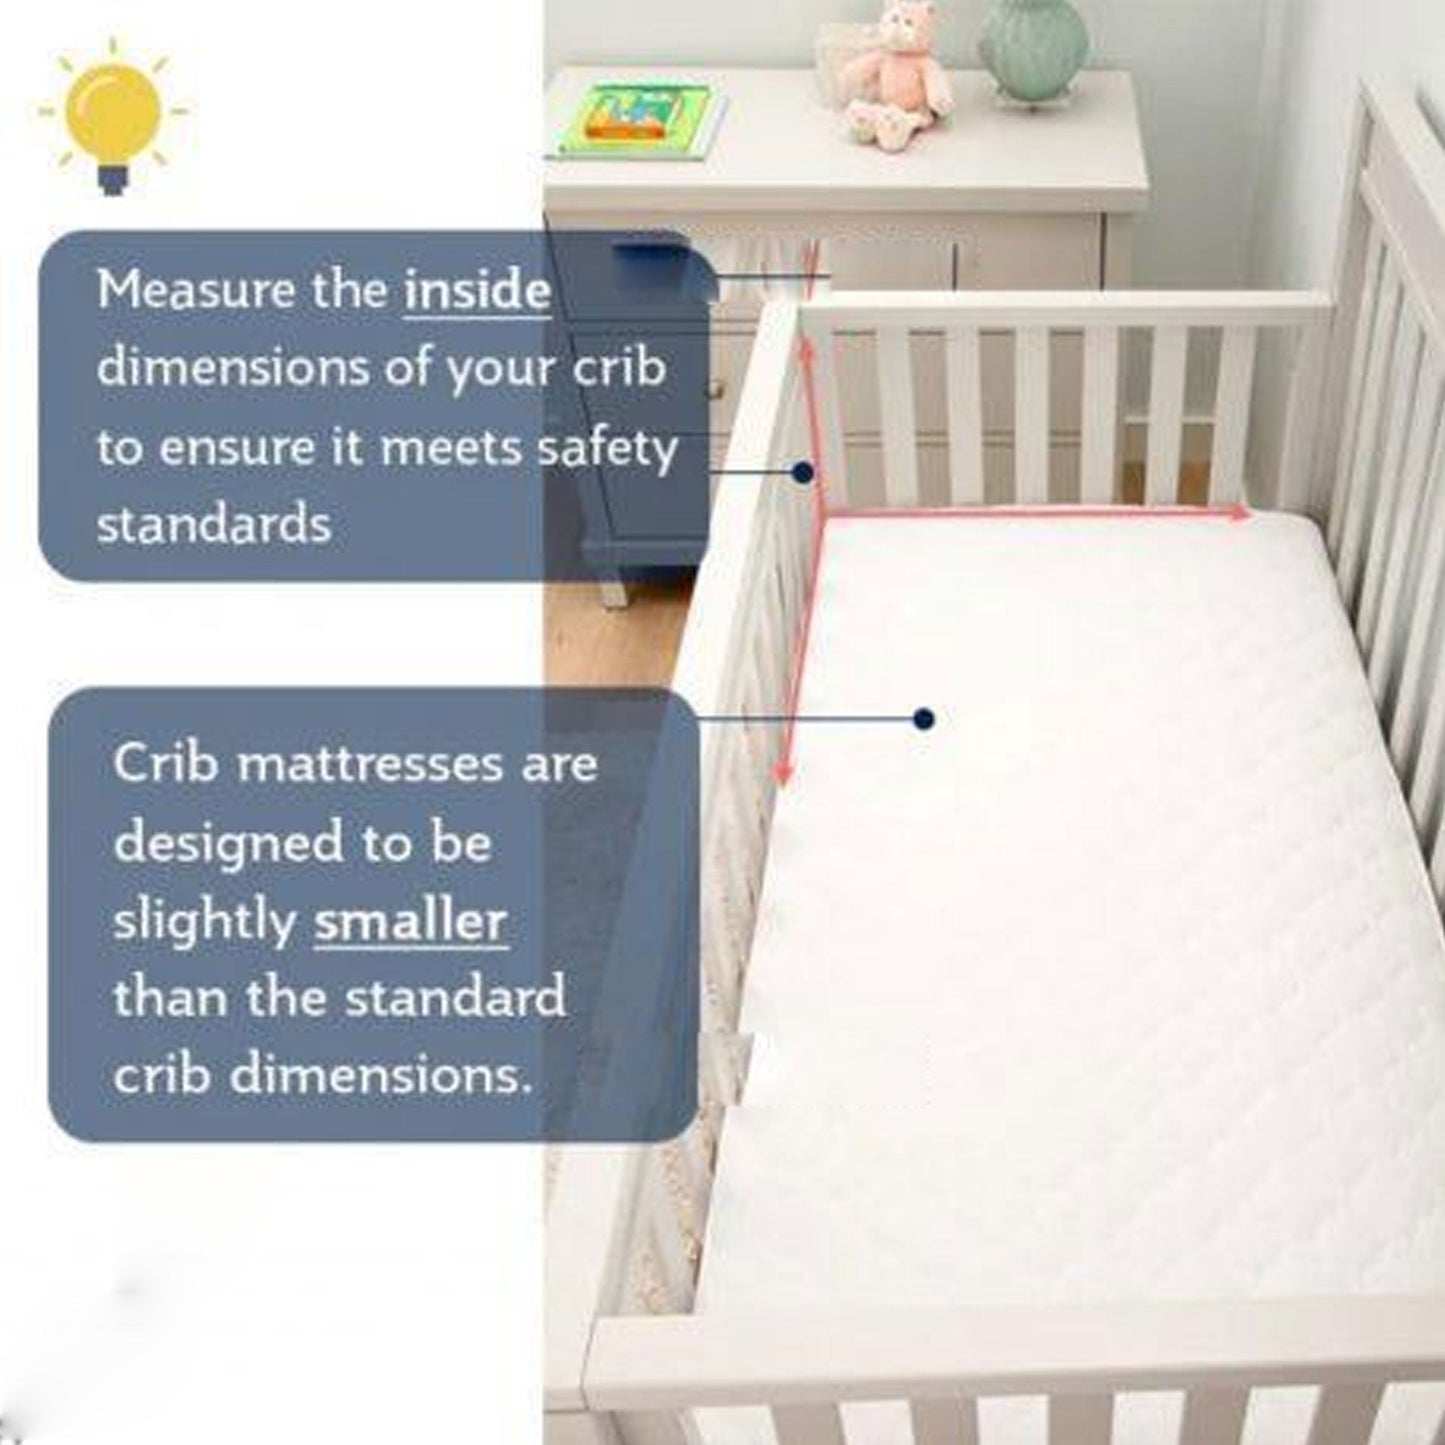 89 X 30 X 4 CM - CRIB Breathable Quilted Cot Baby Mattress - TheComfortshop.co.ukNursery Bedding0721718957232thecomfortshopTheComfortshop.co.ukCrib 89 x 3089 X 30 X 4 CM - CRIB Breathable Quilted Cot Baby Mattress - TheComfortshop.co.uk